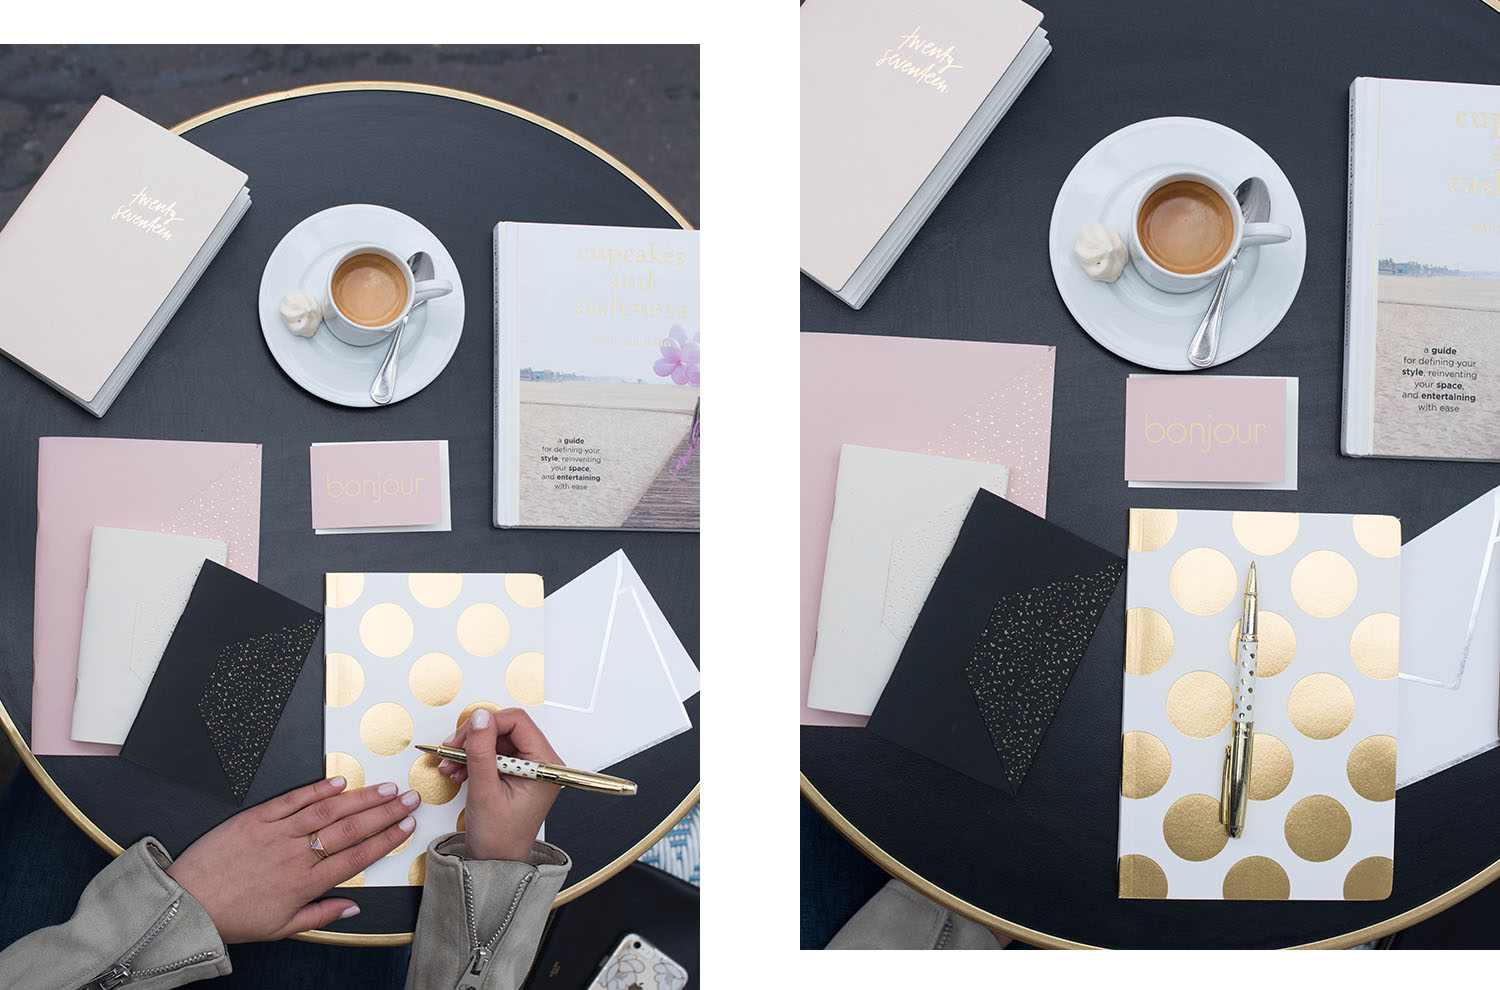 The Plannerist paper goods laid out on a cafe table in Paris in front of fashion blogger Cee Fardoe of Coco & Vera